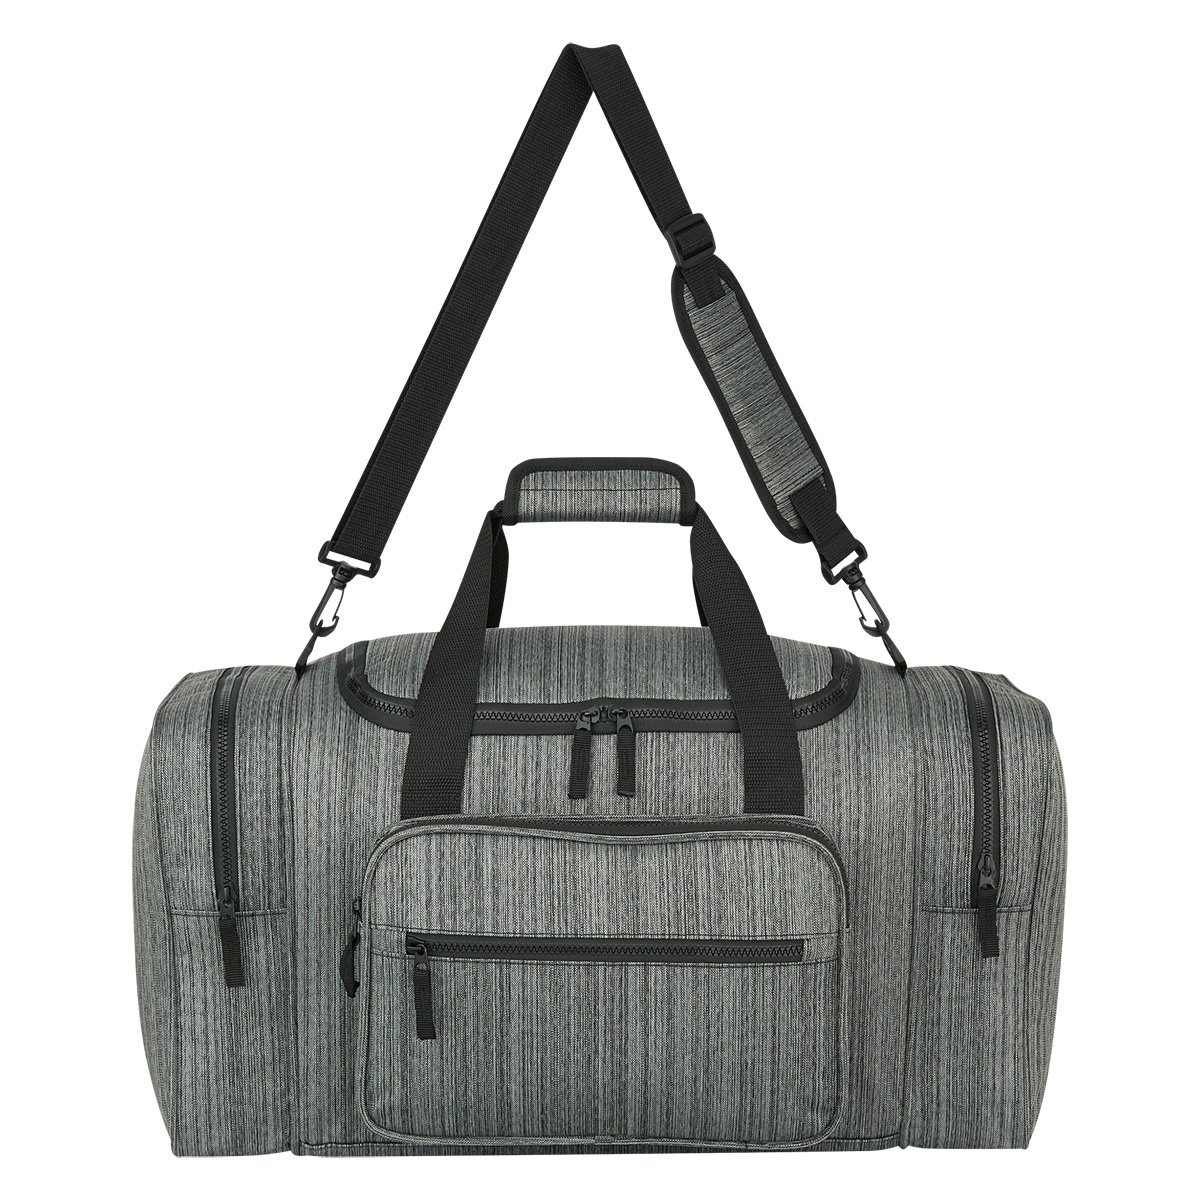 #3264 Heathered Duffel Bag - Hit Promotional Products